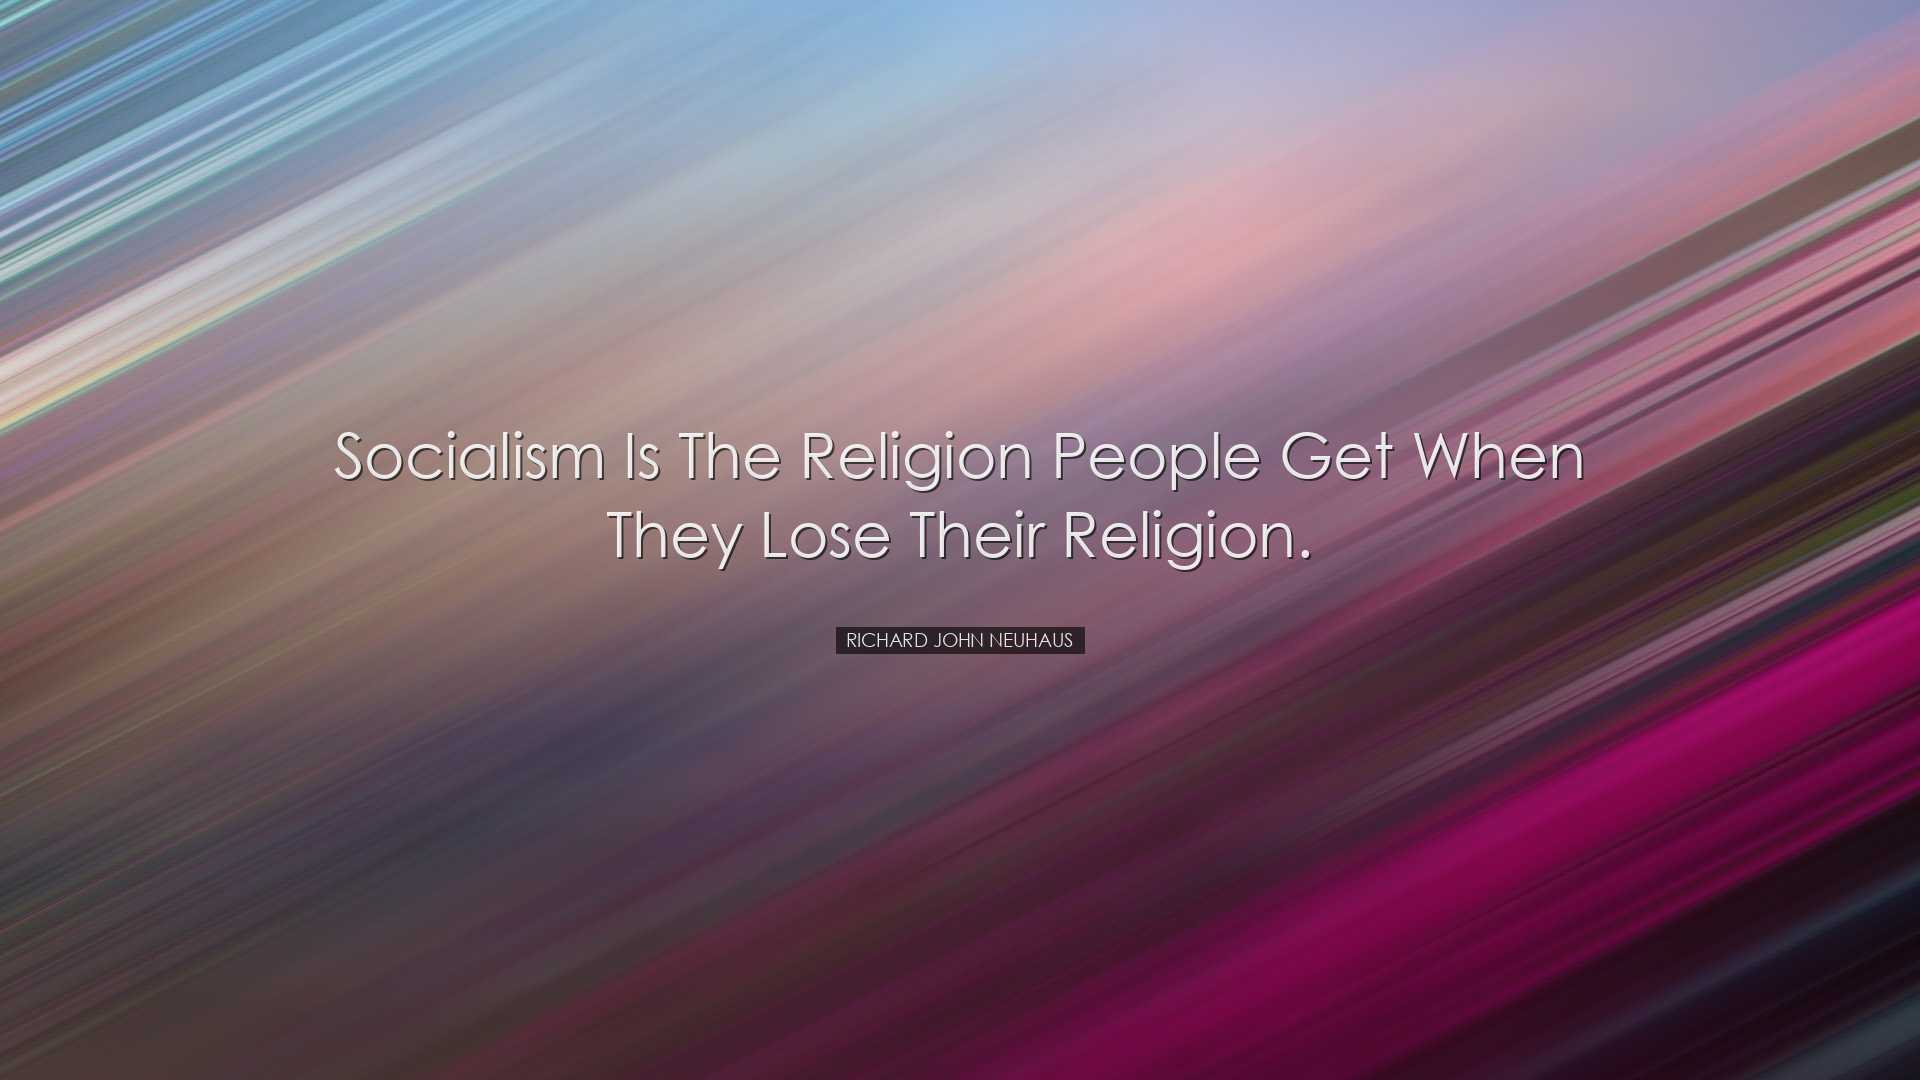 Socialism is the religion people get when they lose their religion